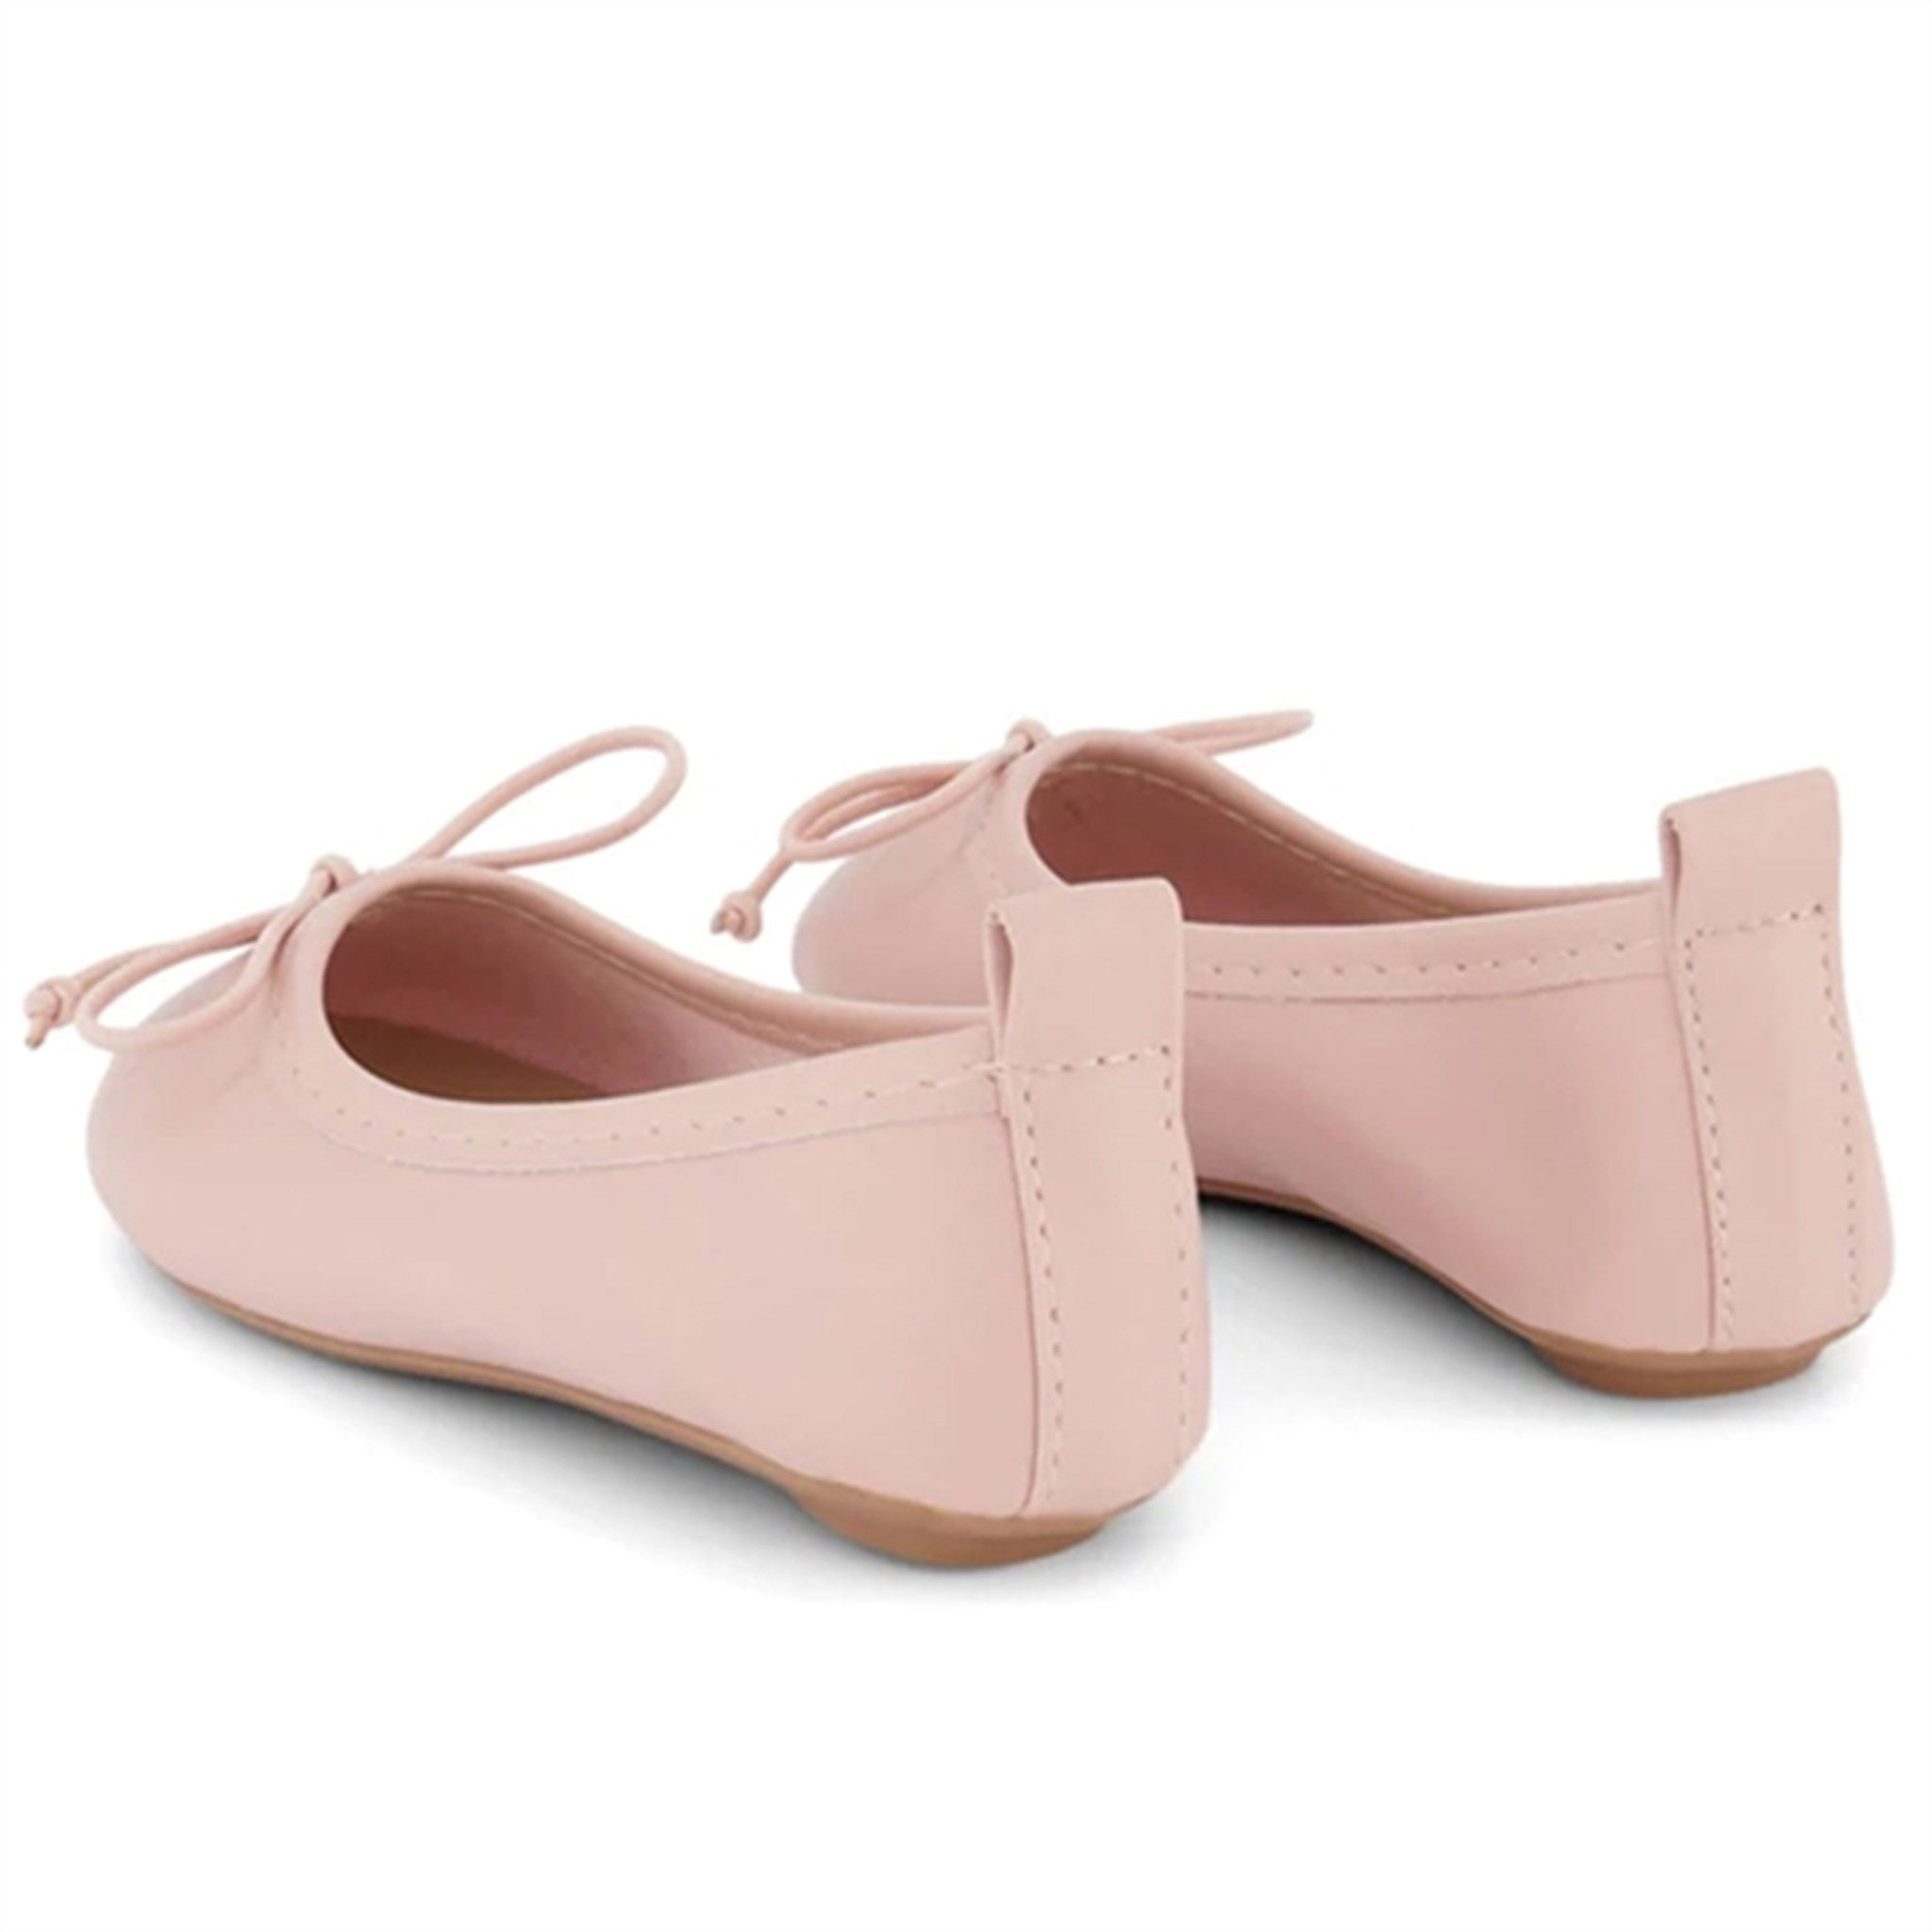 Dolly by Le Petit Tom Ballerina Girls Pink 7